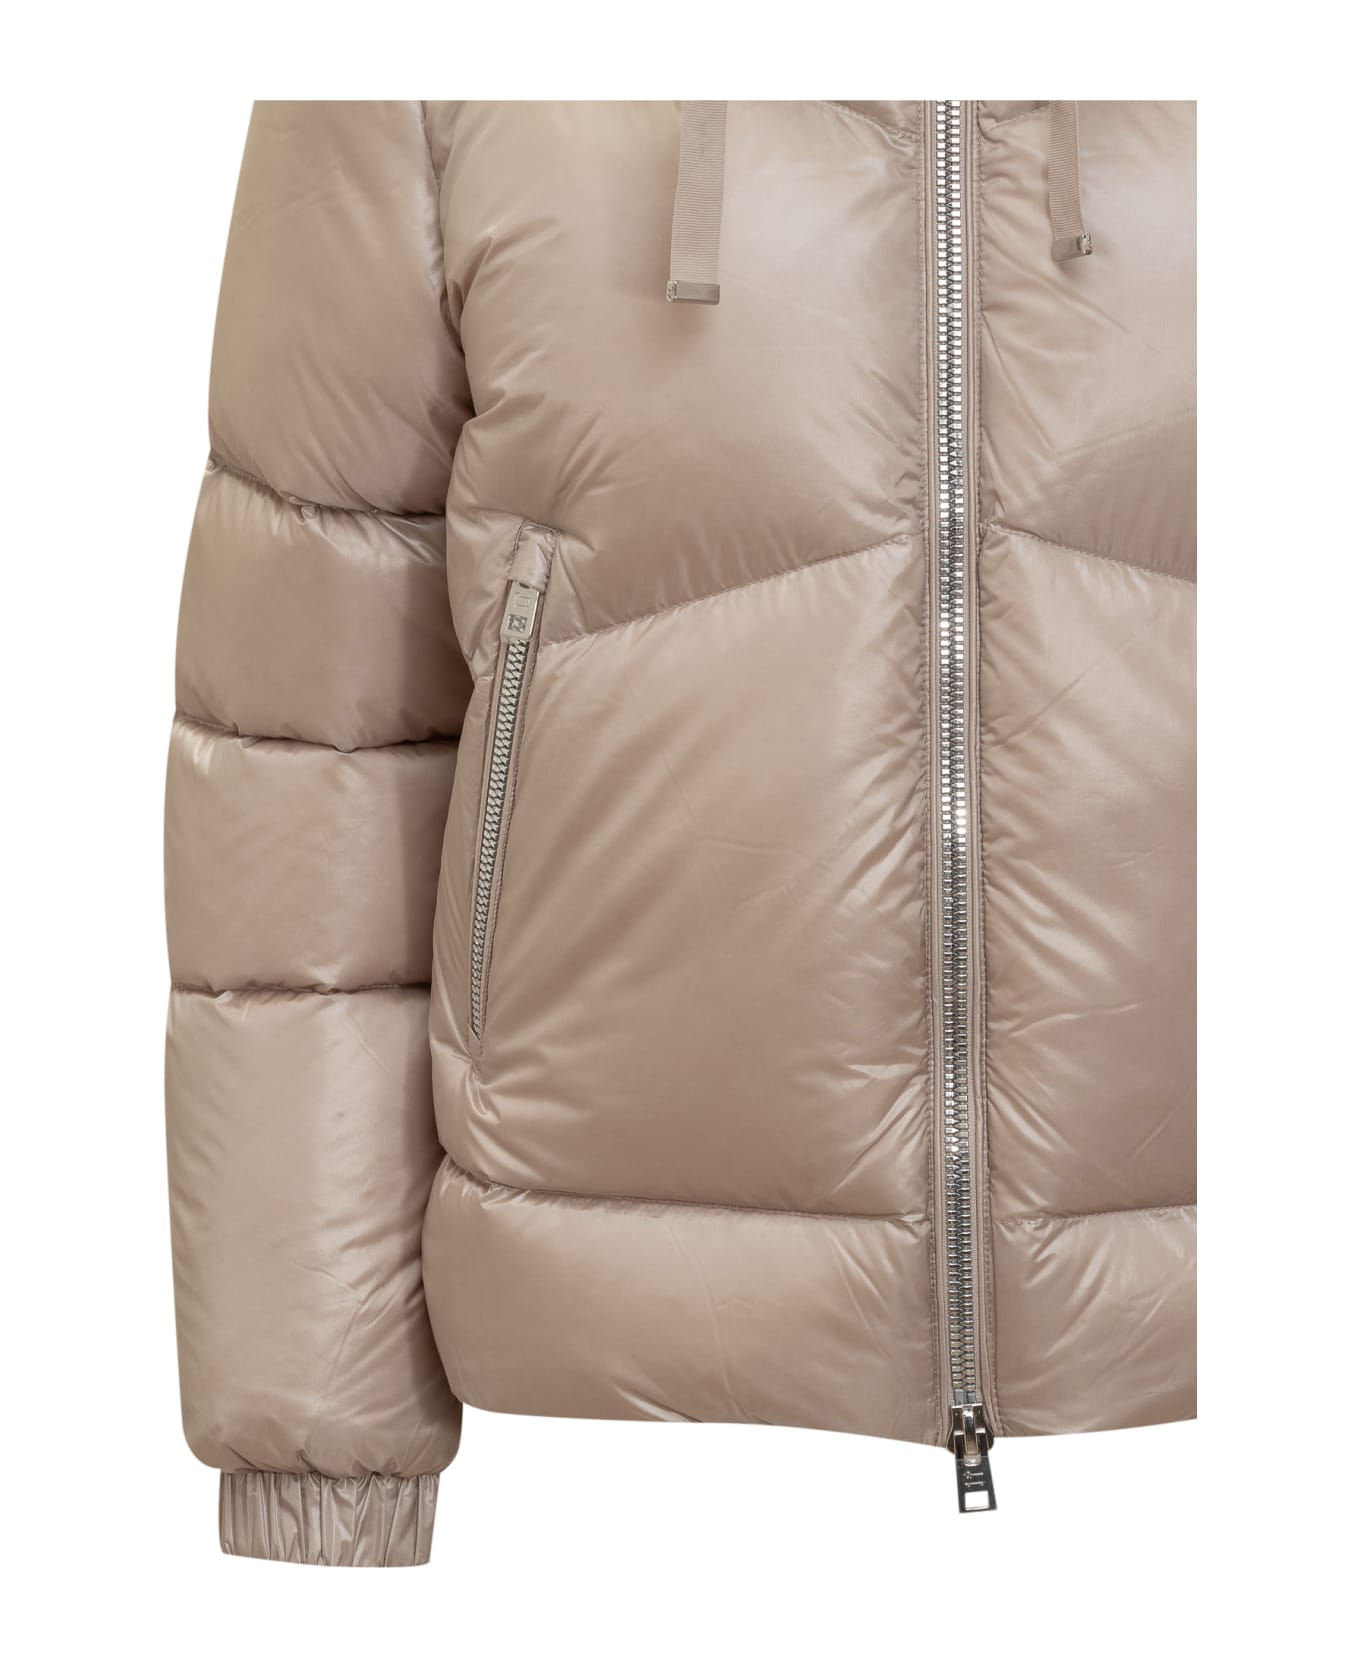 Woolrich Aliquippa Down Jacket - LIGHT TAUPE